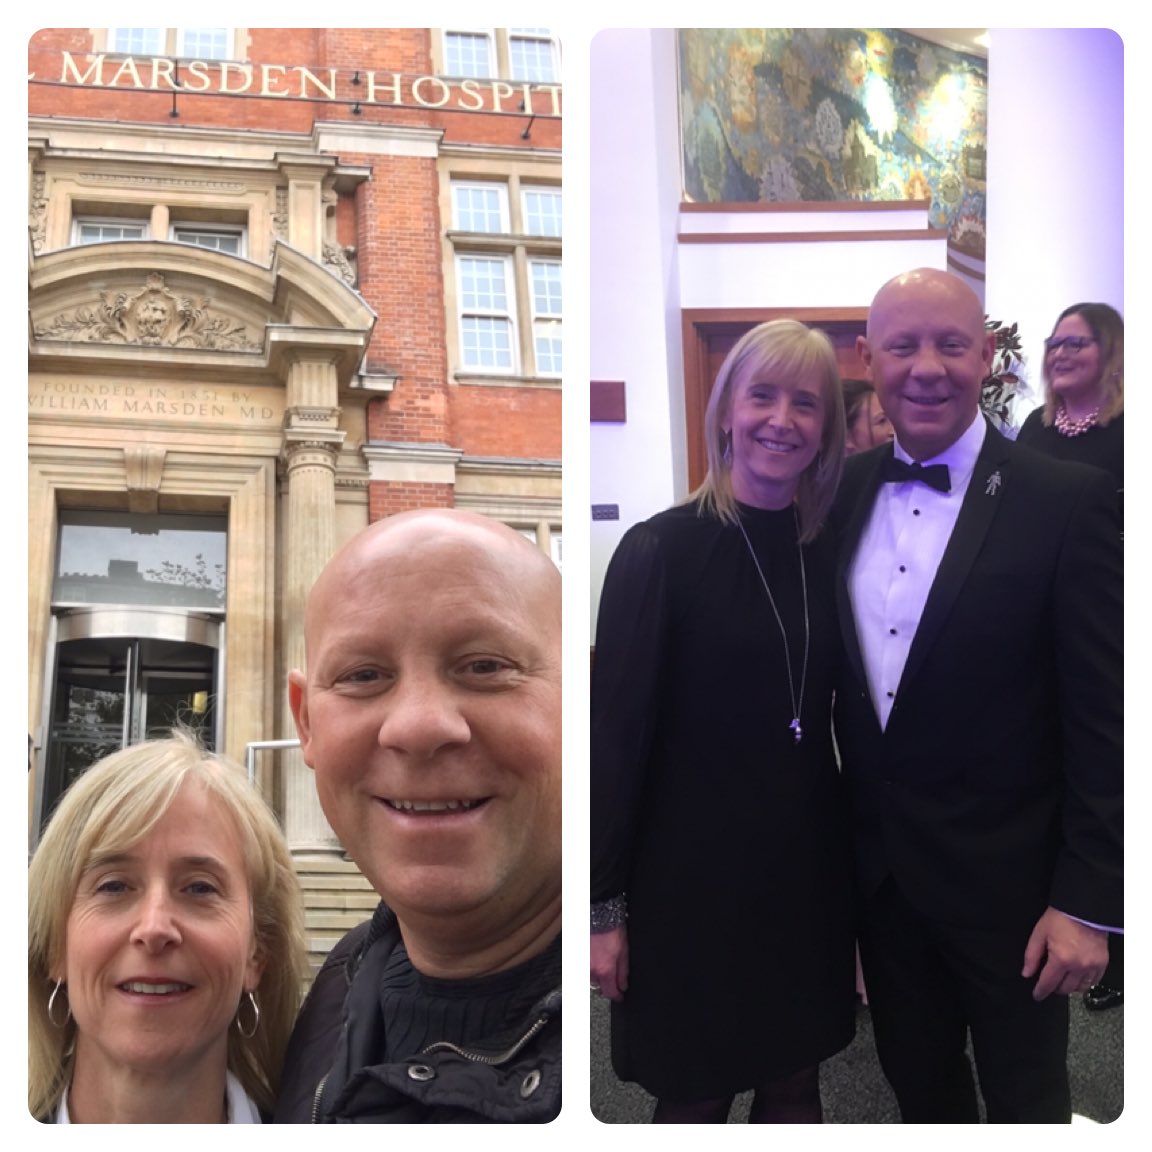 2 years ago today we were heading into the Royal Marsden for my first Chemotherapy session tonight we are celebrating at the Scottish Pharmacy Awards. #Blacktie #poshfrock